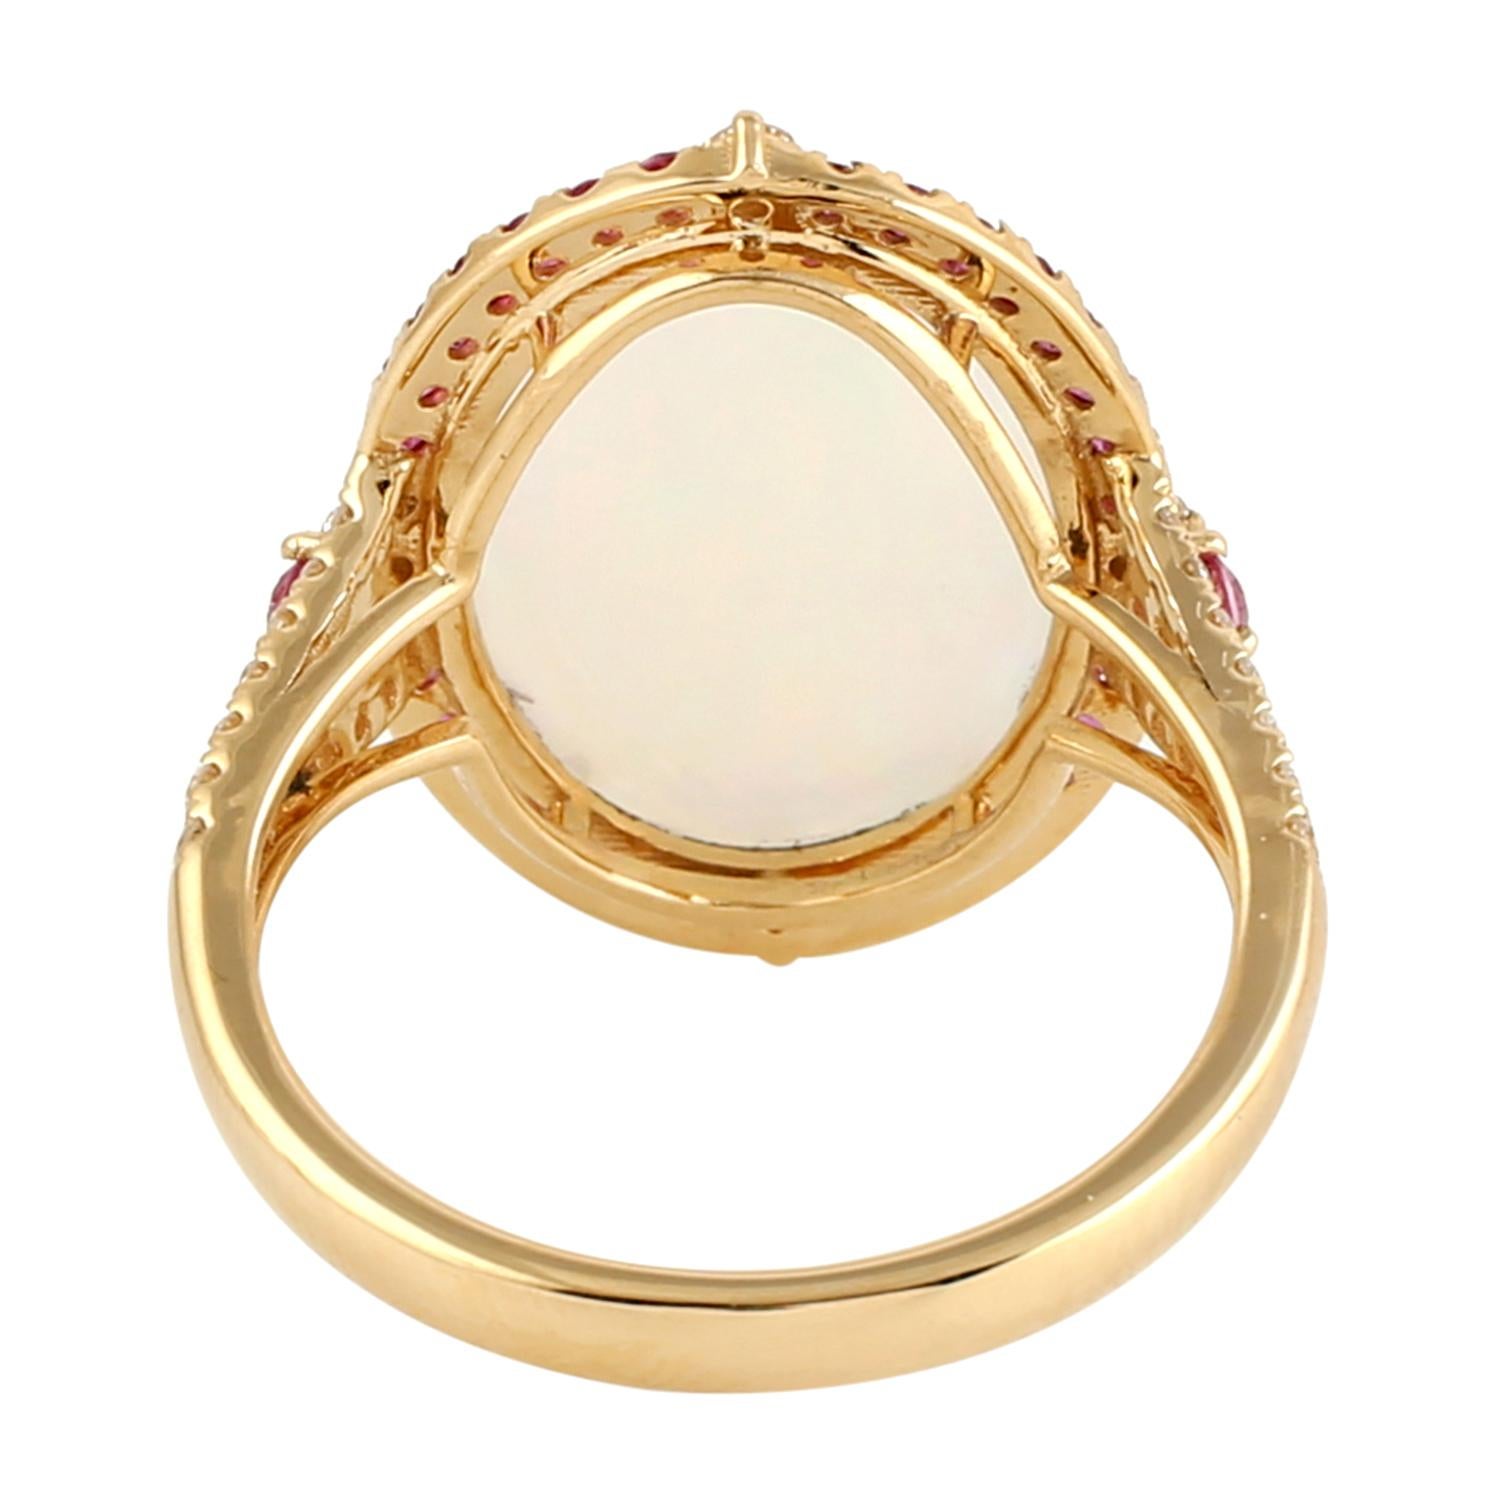 This ring has been meticulously crafted from 14-karat gold.  It is hand set with 3.68 carat Ethiopian opal, .55  carats pink sapphire & .25 carats of sparkling diamonds. 

The ring is a size 7 and may be resized to larger or smaller upon request.